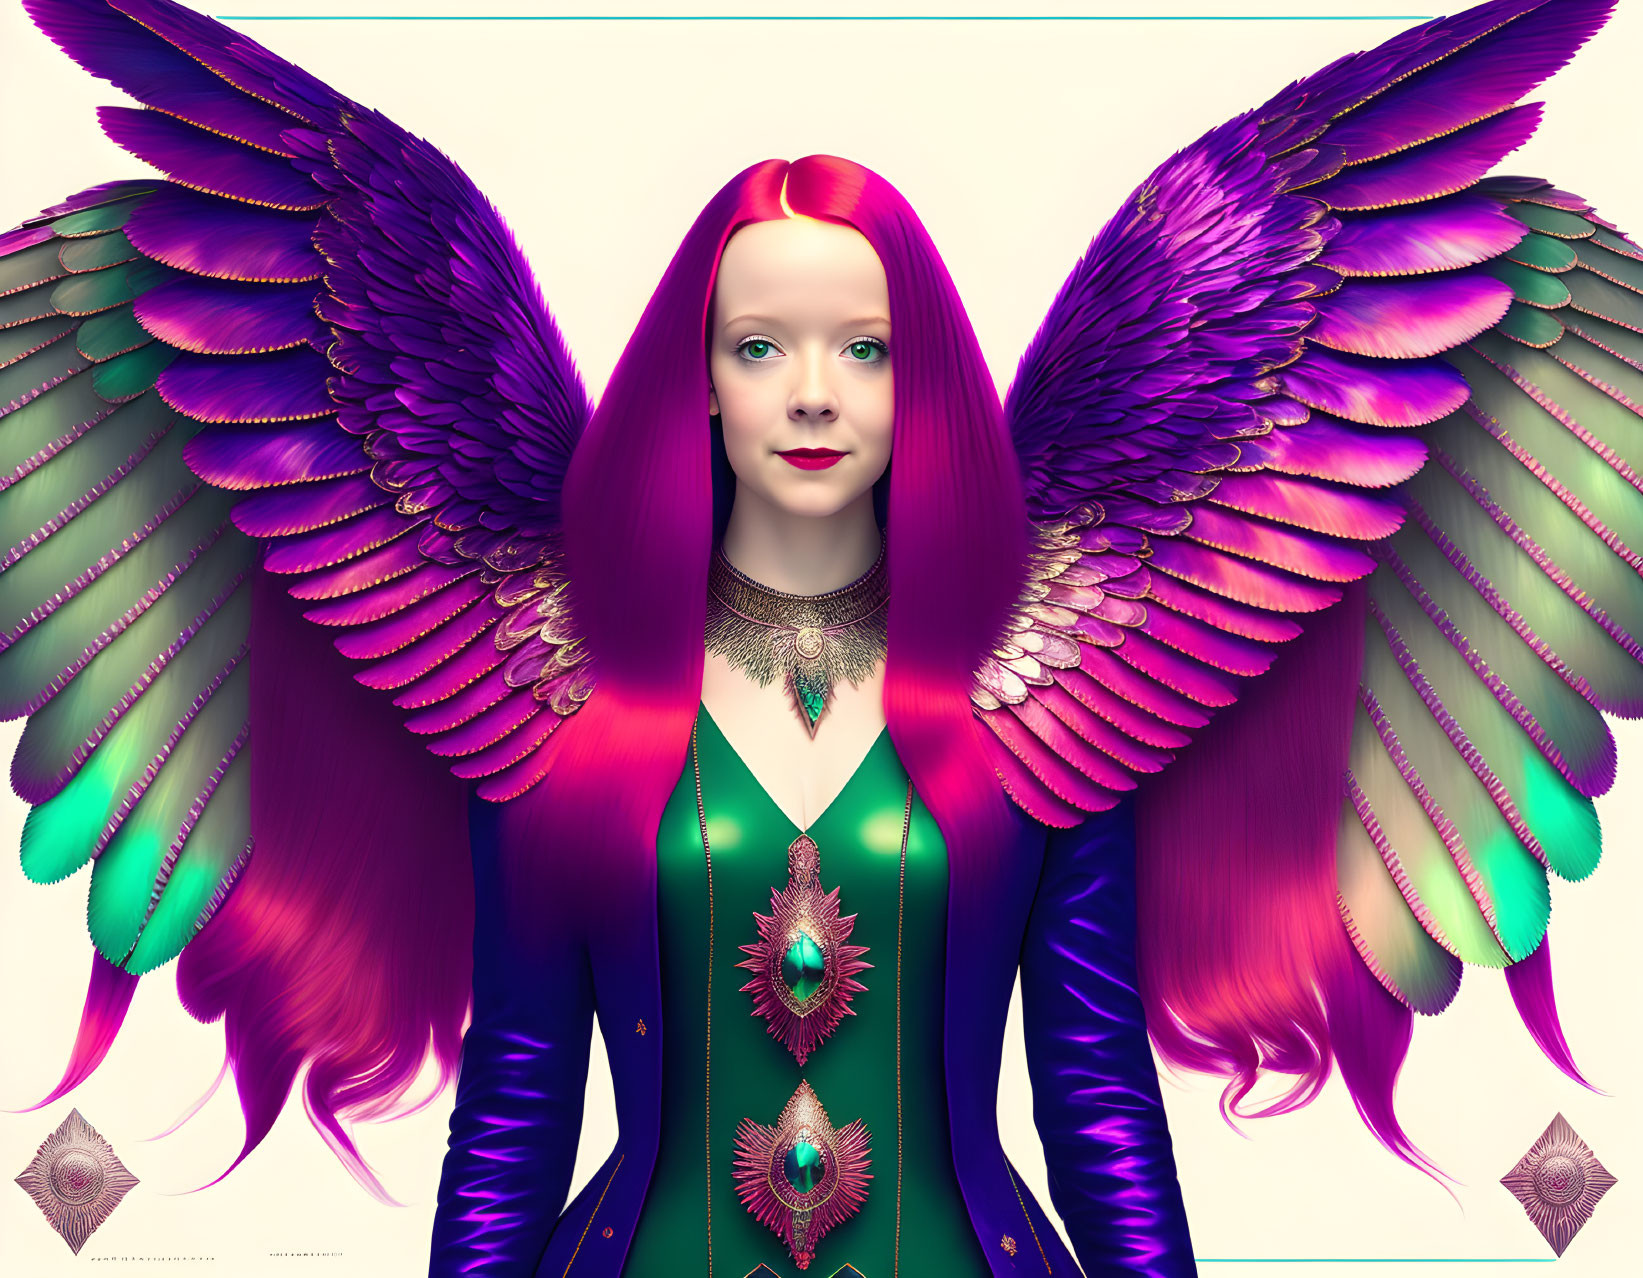 Digital Artwork: Woman with Purple and Green Wings, Red Hair, Colorful Clothing